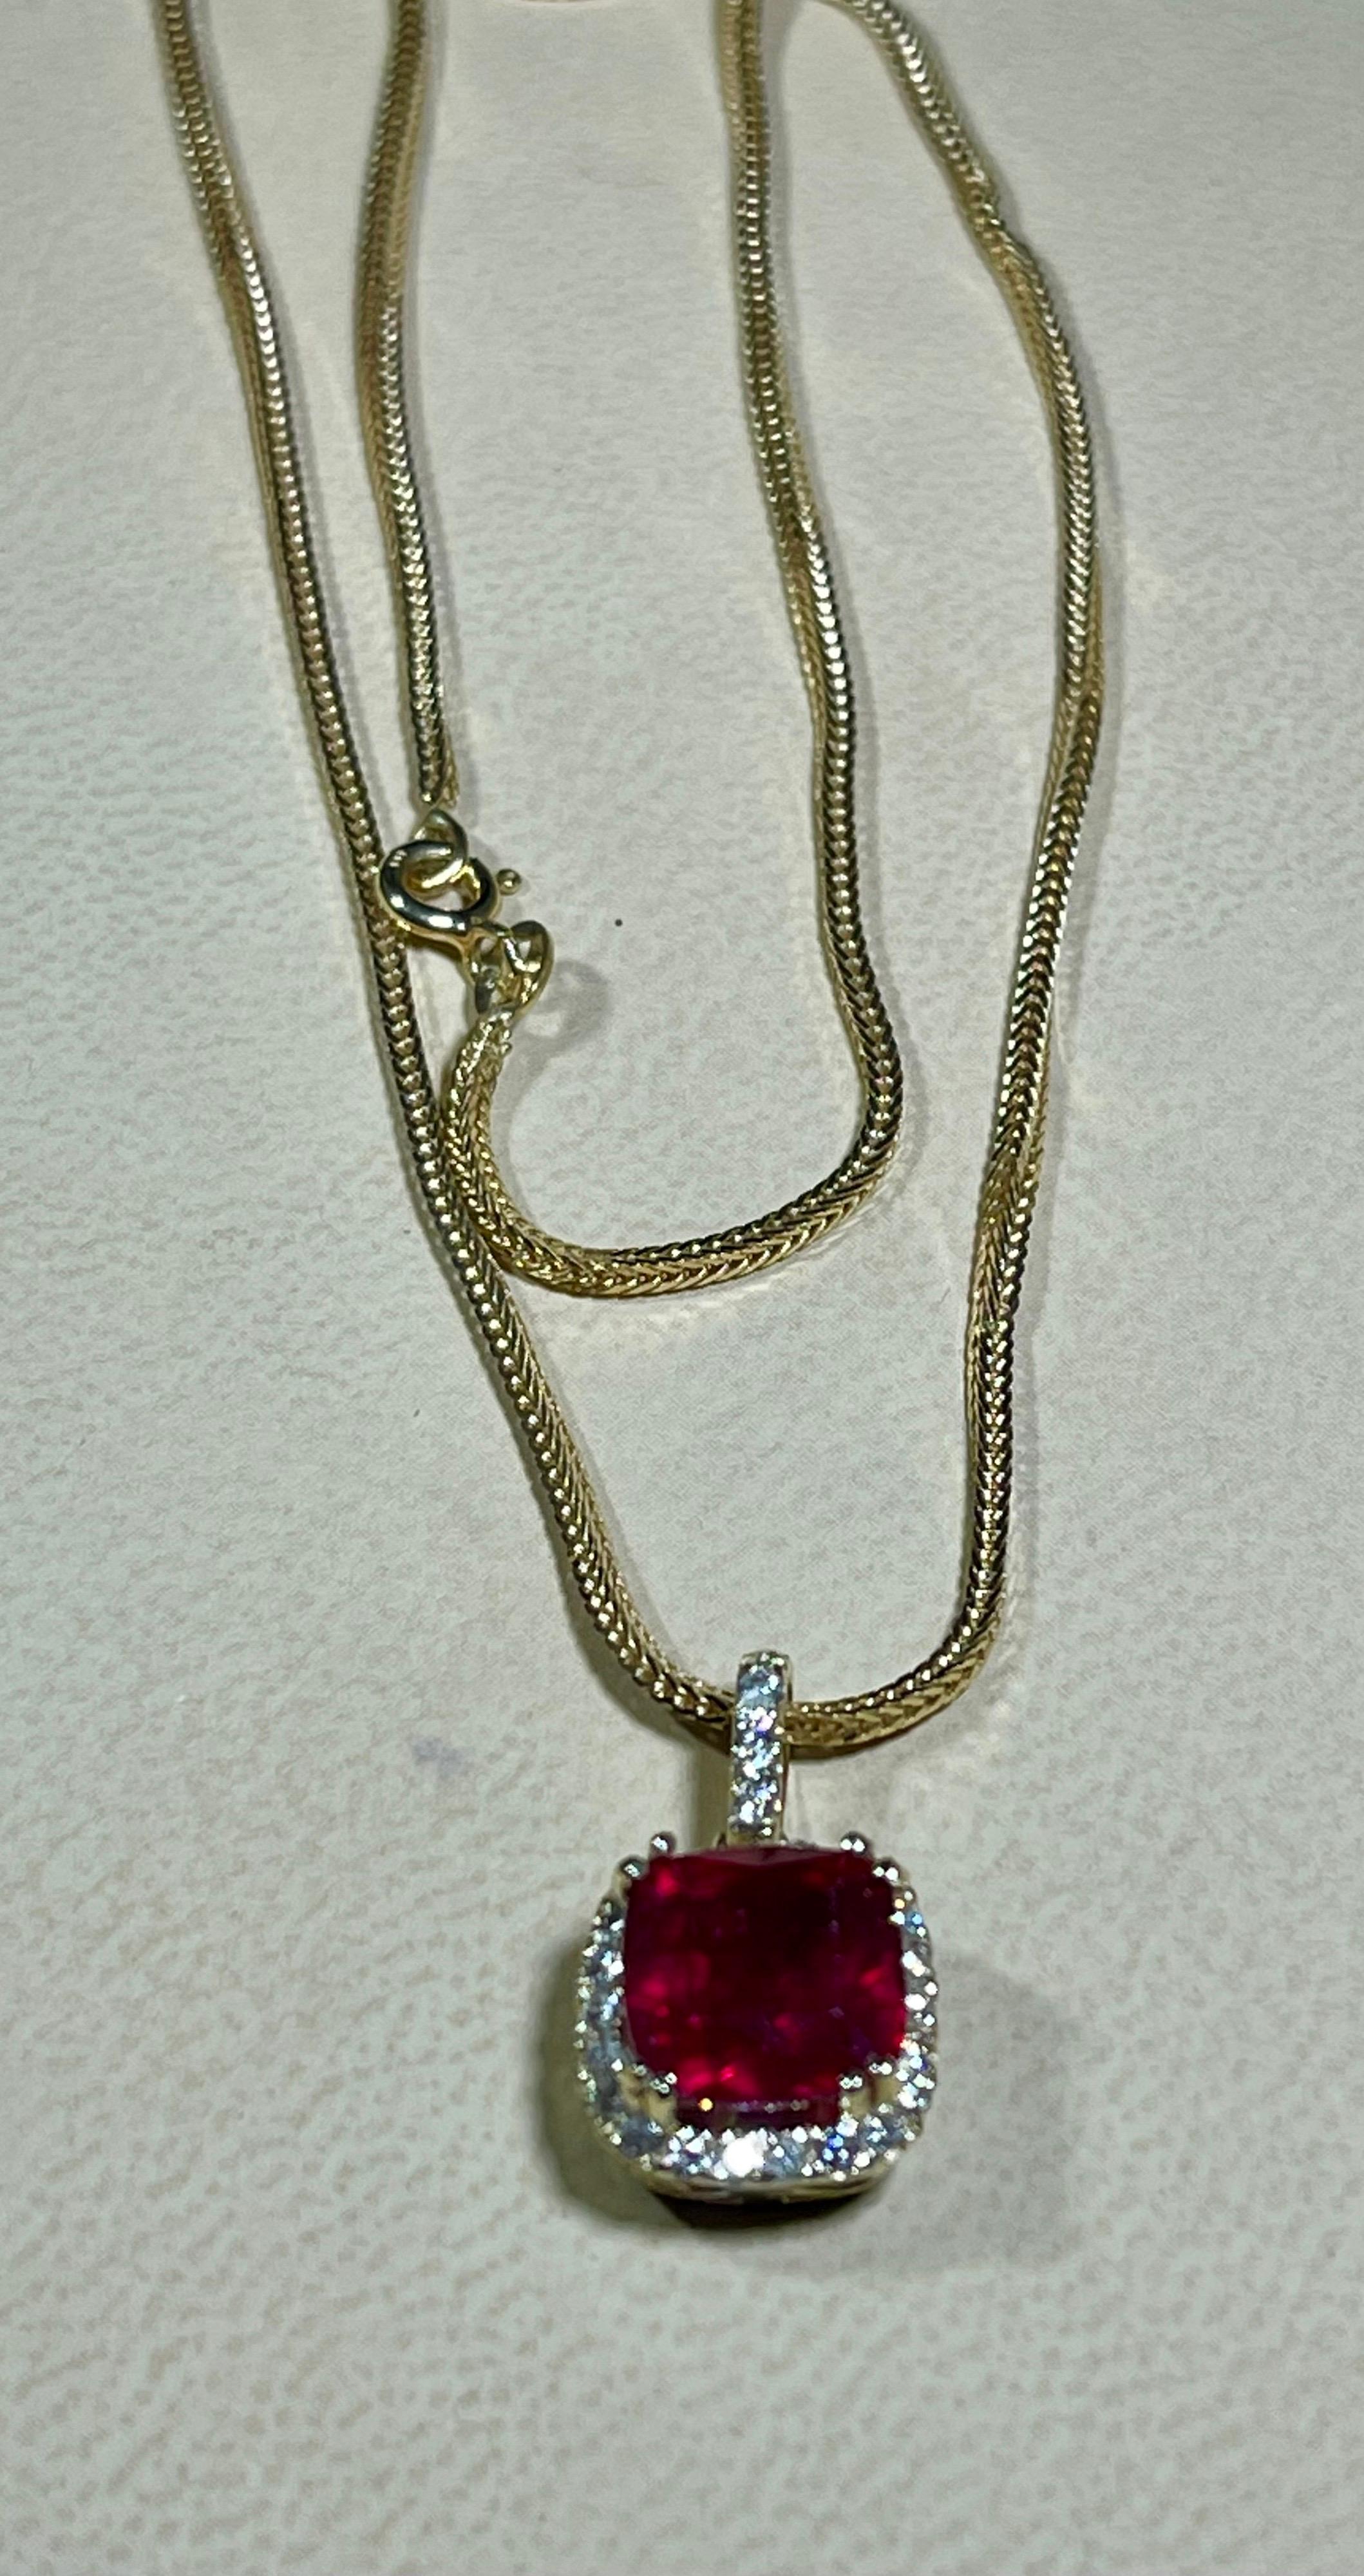 Approximately 3 to 3.5 Carat Cushion Cut Ruby Pendant or Necklace 14 Karat Yellow Gold with Chain 18